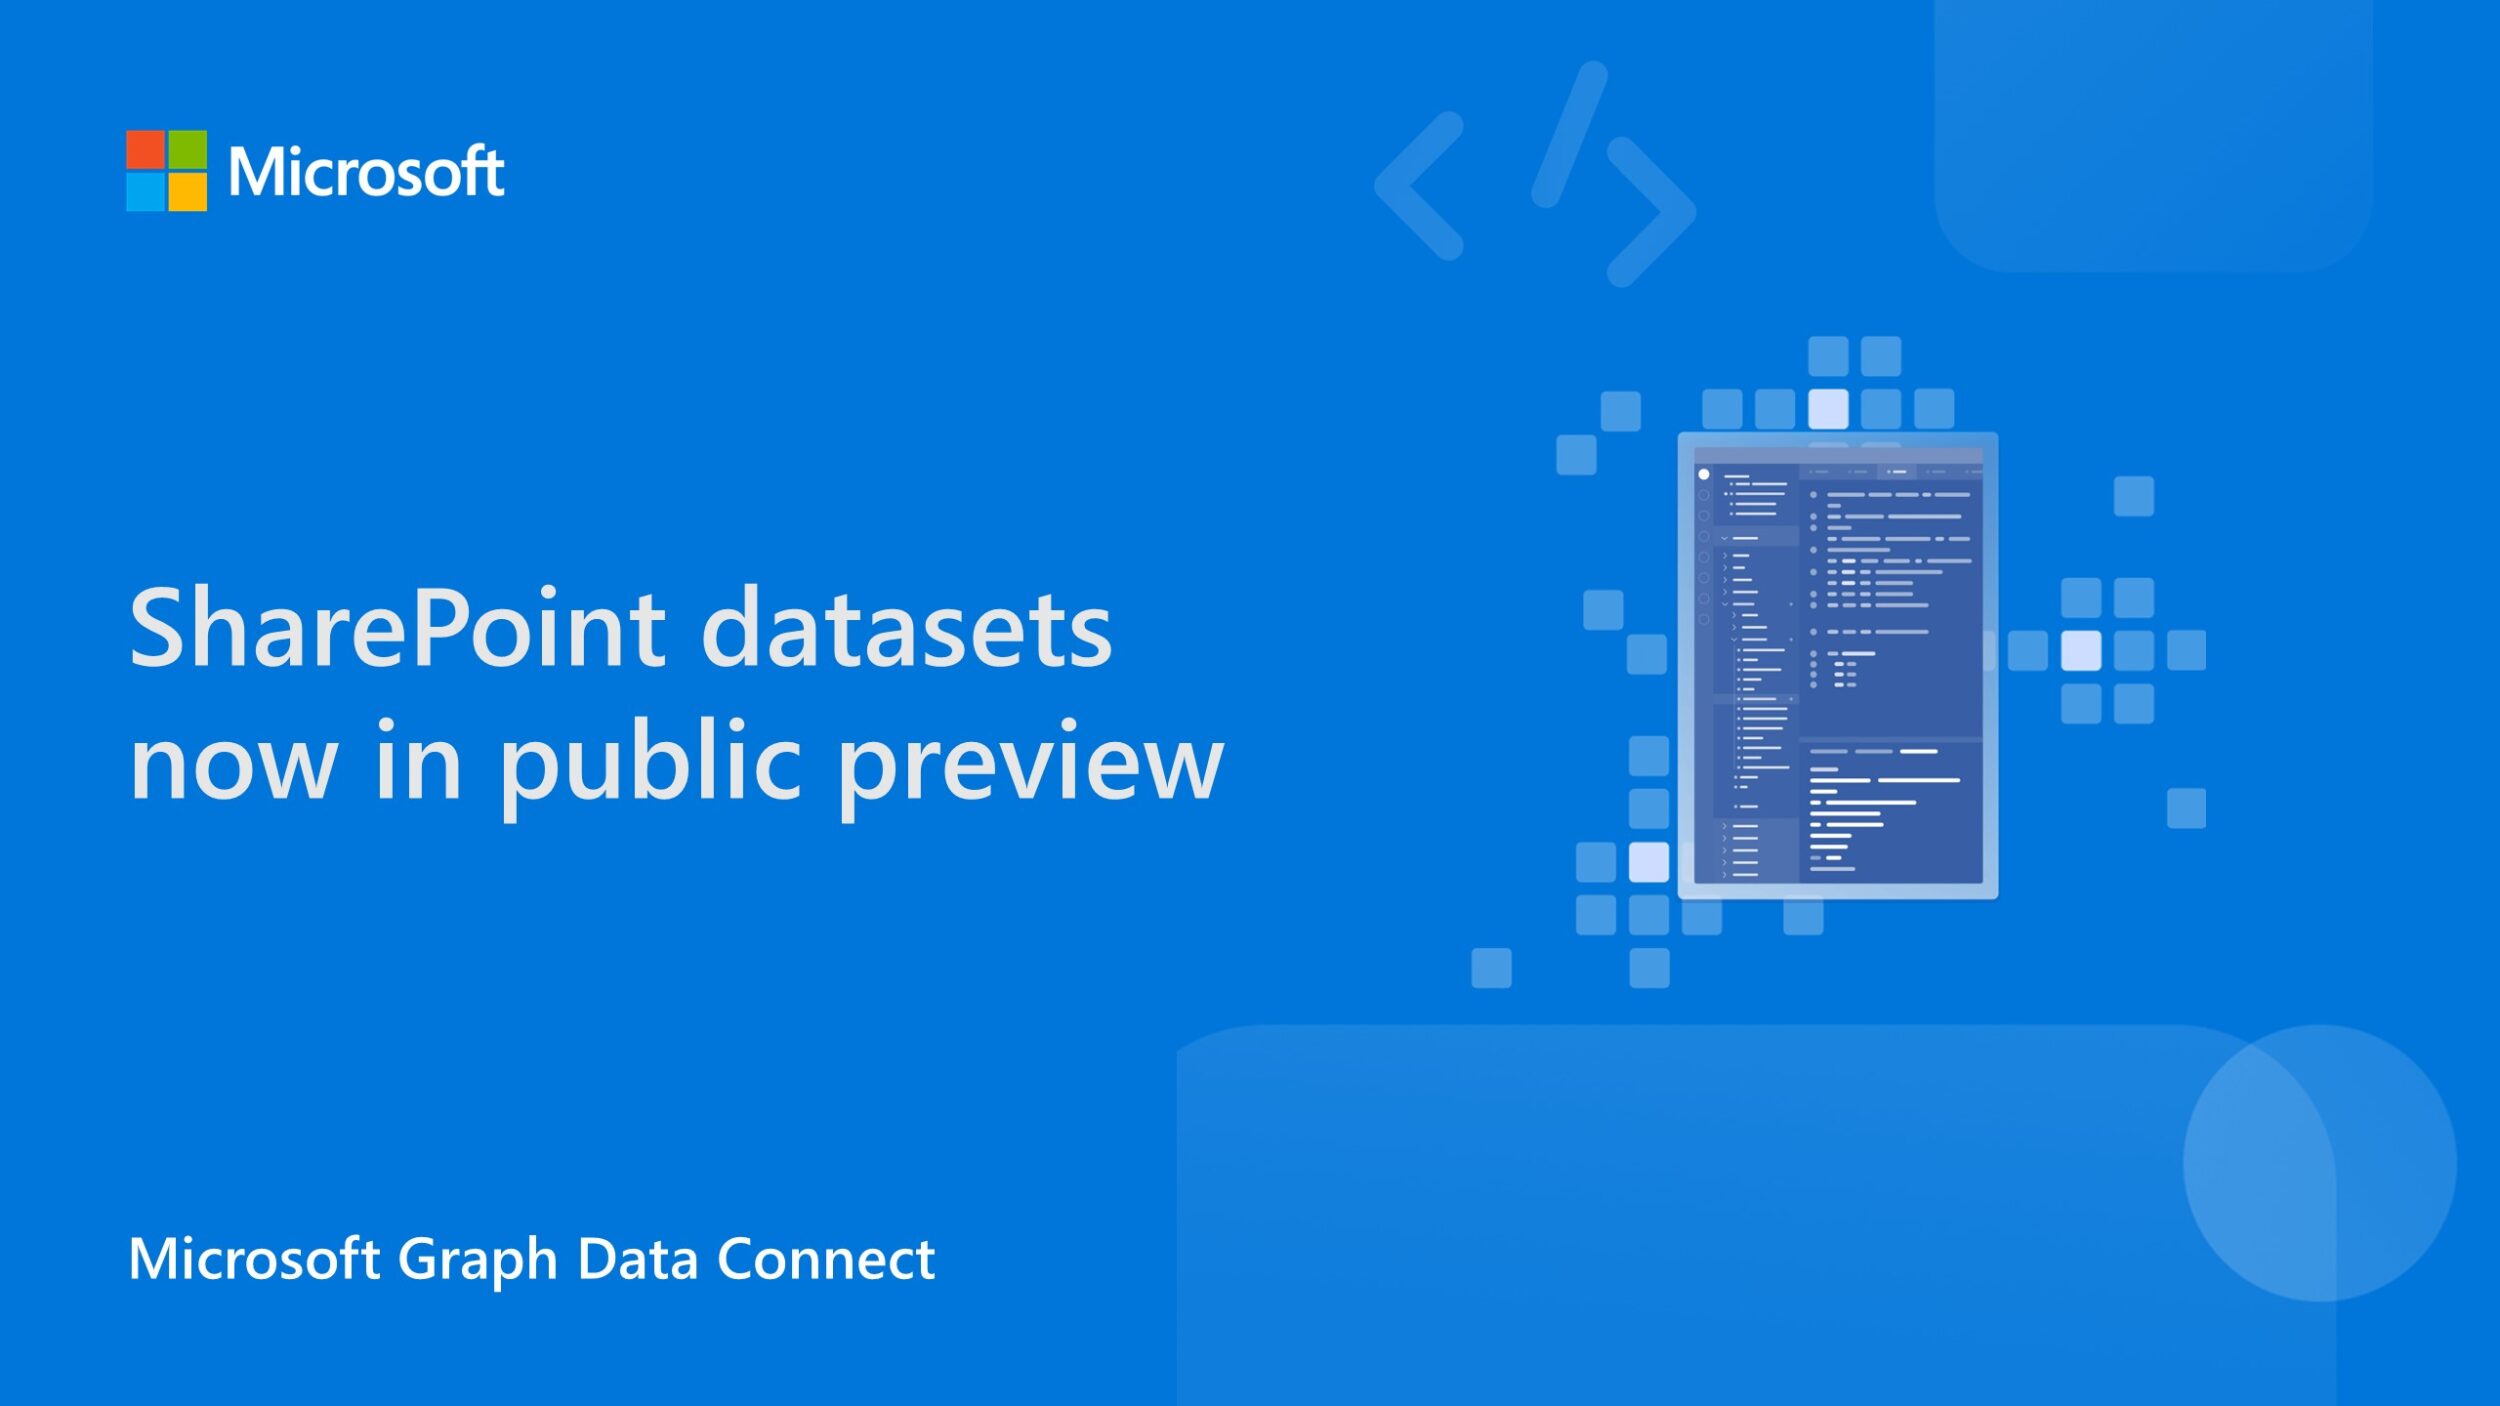 SharePoint datasets now in public preview